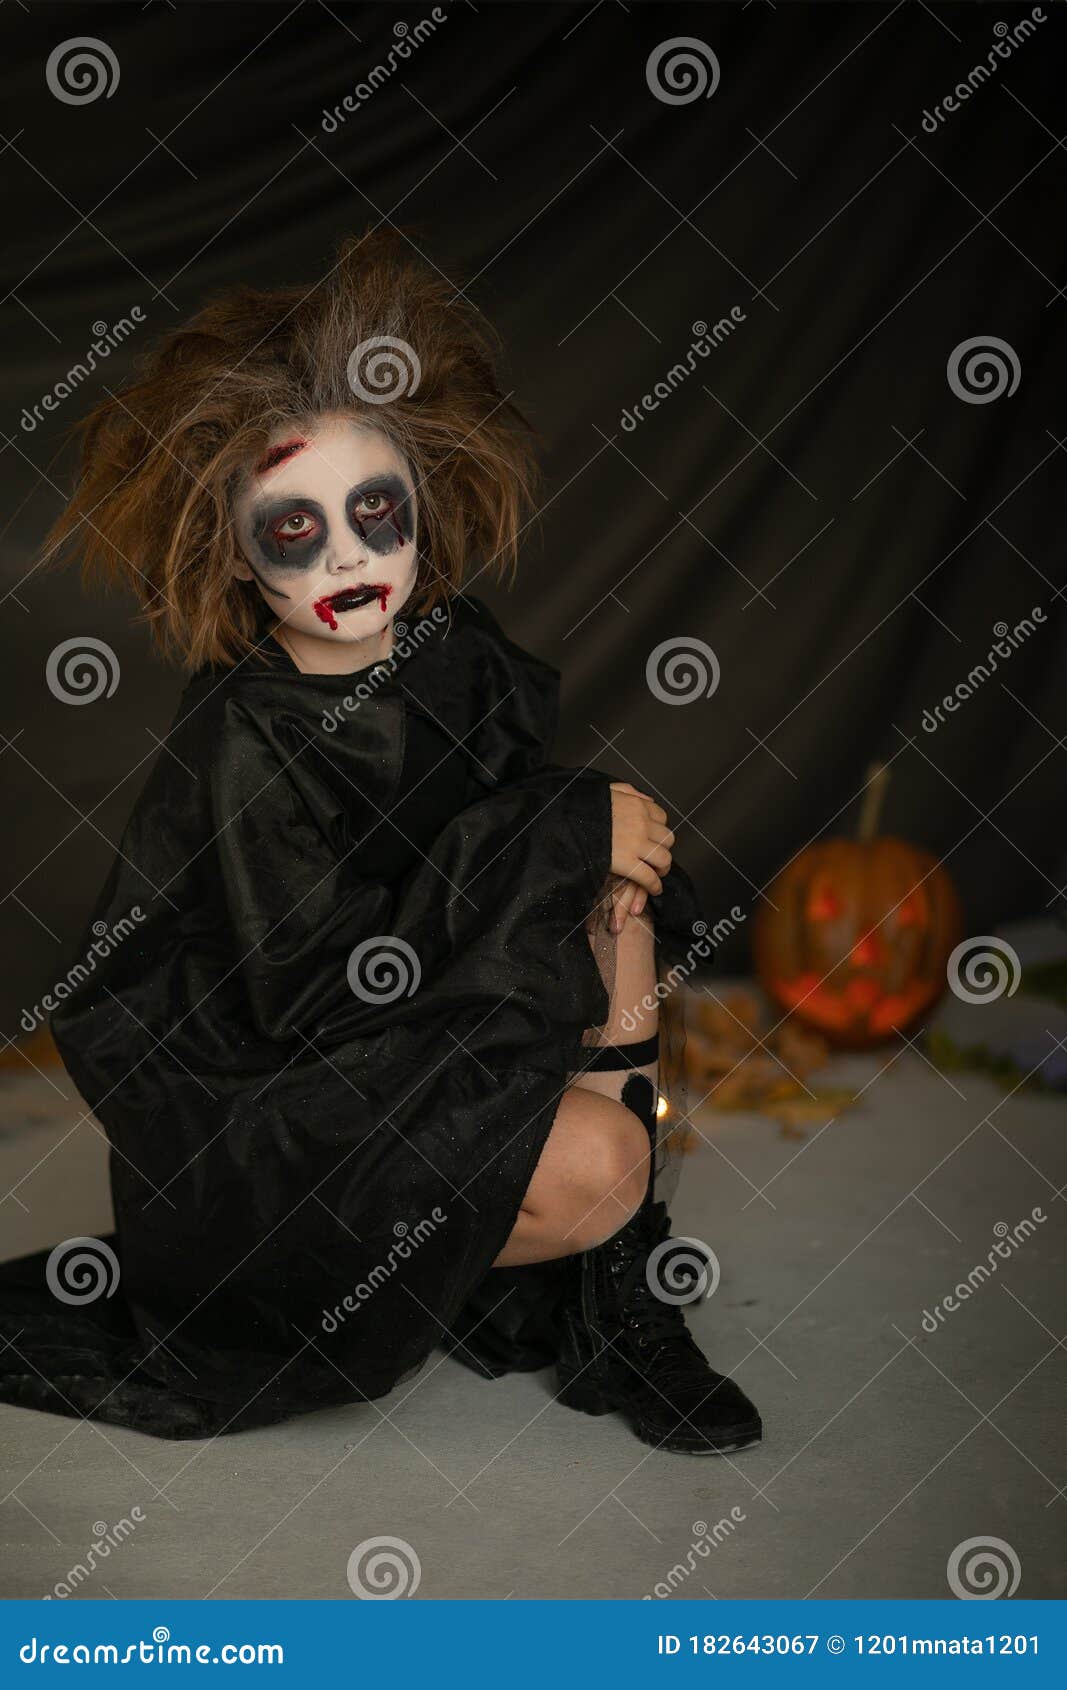 Halloween Little Girl Vampire Halloween Vampire Kids Makeup Wounds And Blood On The Face Scary Face Halloween Children S Part Stock Image Image Of People Devil